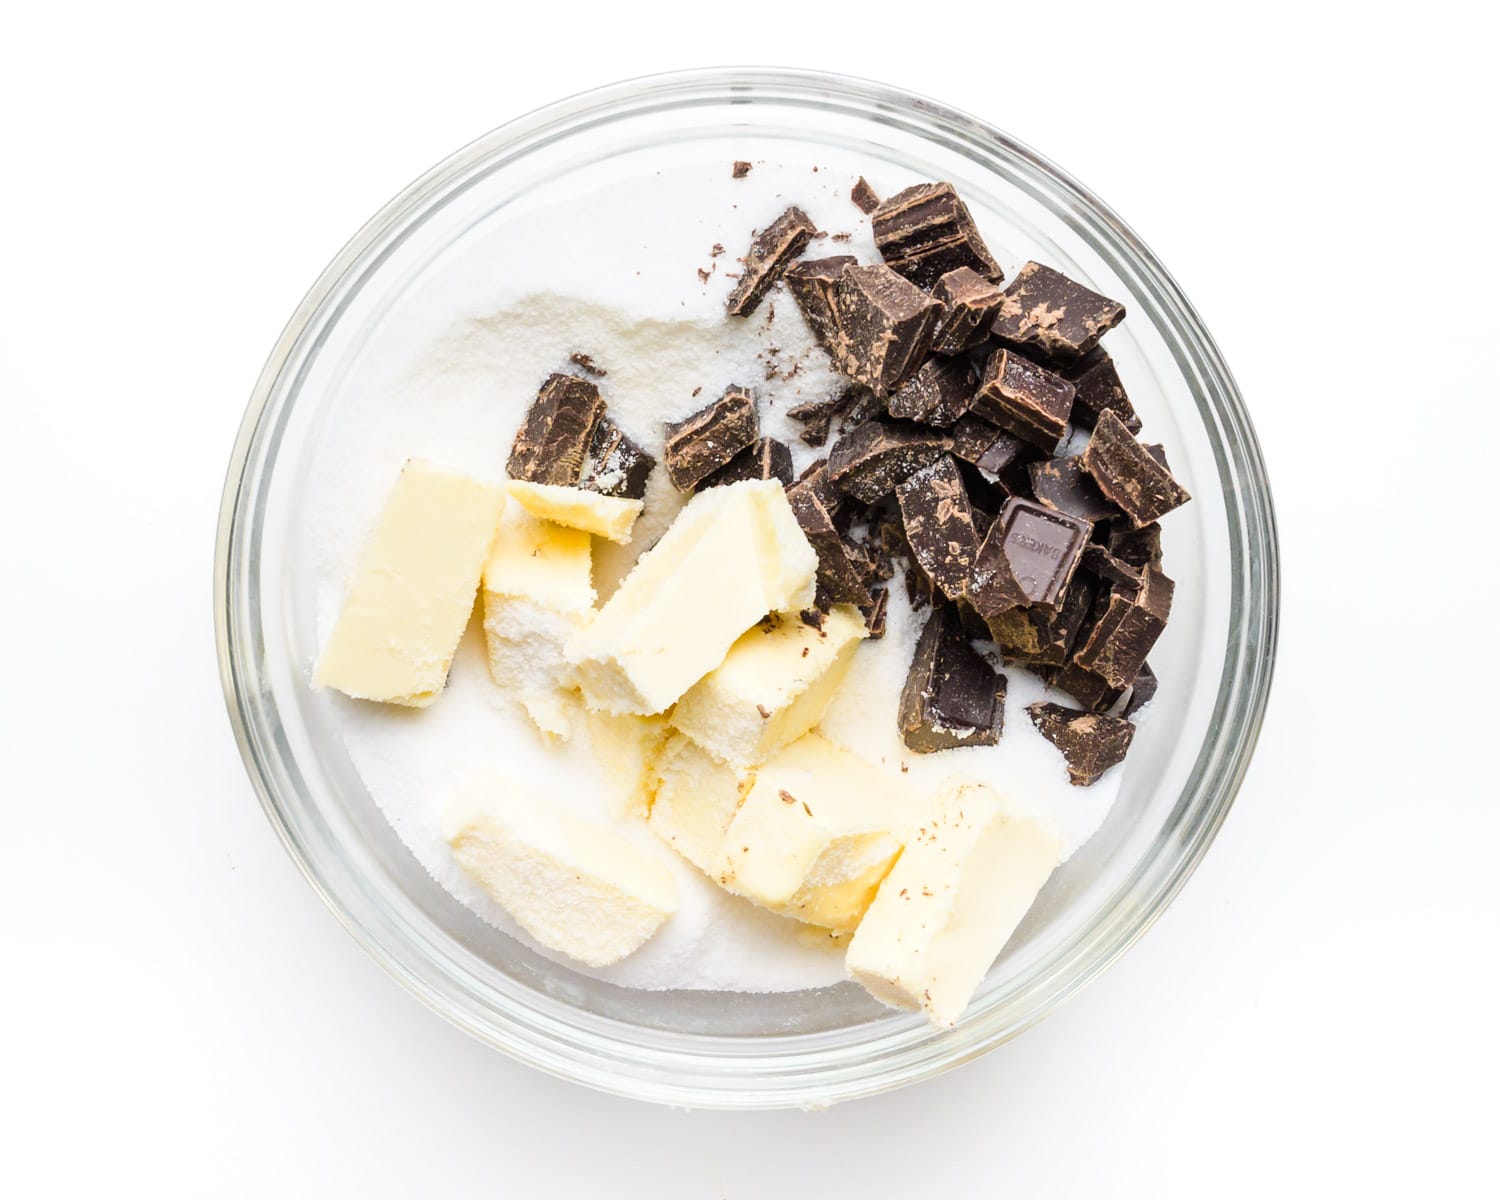 Ingredients are in a glass bowl, including chocolate, sugar, and vegan butter.